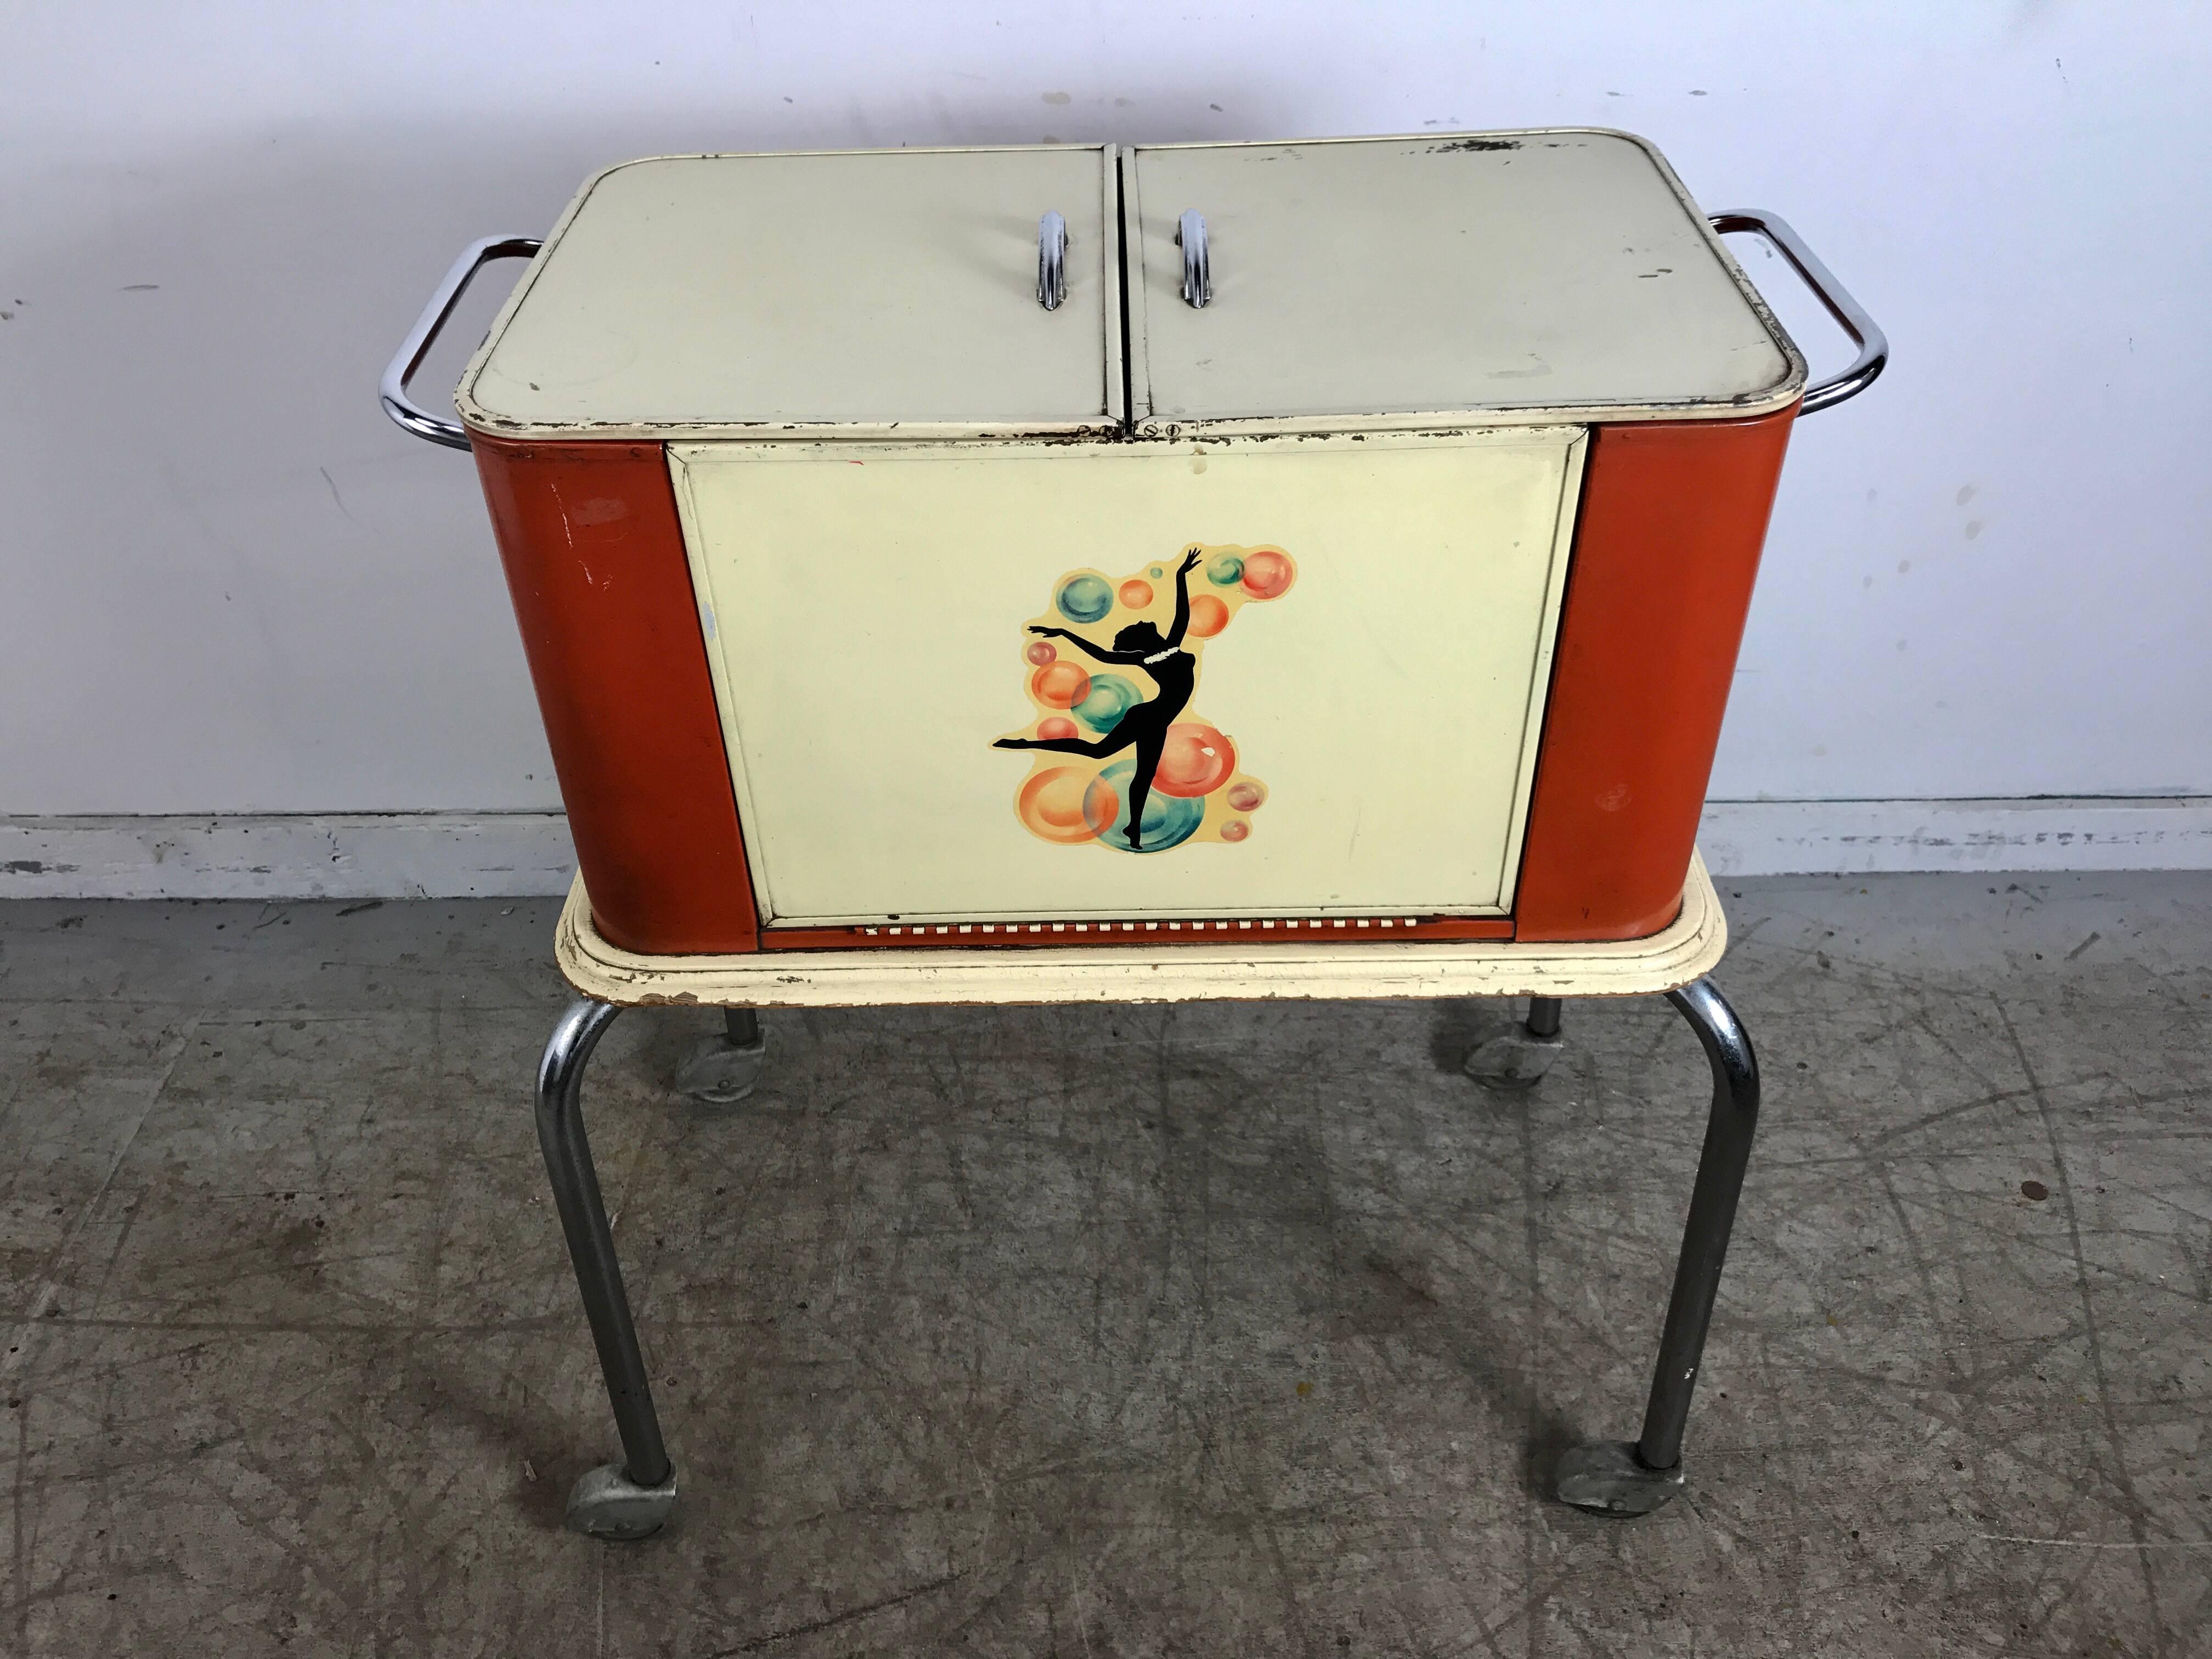 Stylized Art Deco portable dry bar, great little item. Rounded cabinet unfolds into a perfect portable server, tubular chrome base with skirted fender wheels, retains original iconic dancing woman graphic, bar when open measures 48.5 inches wide.